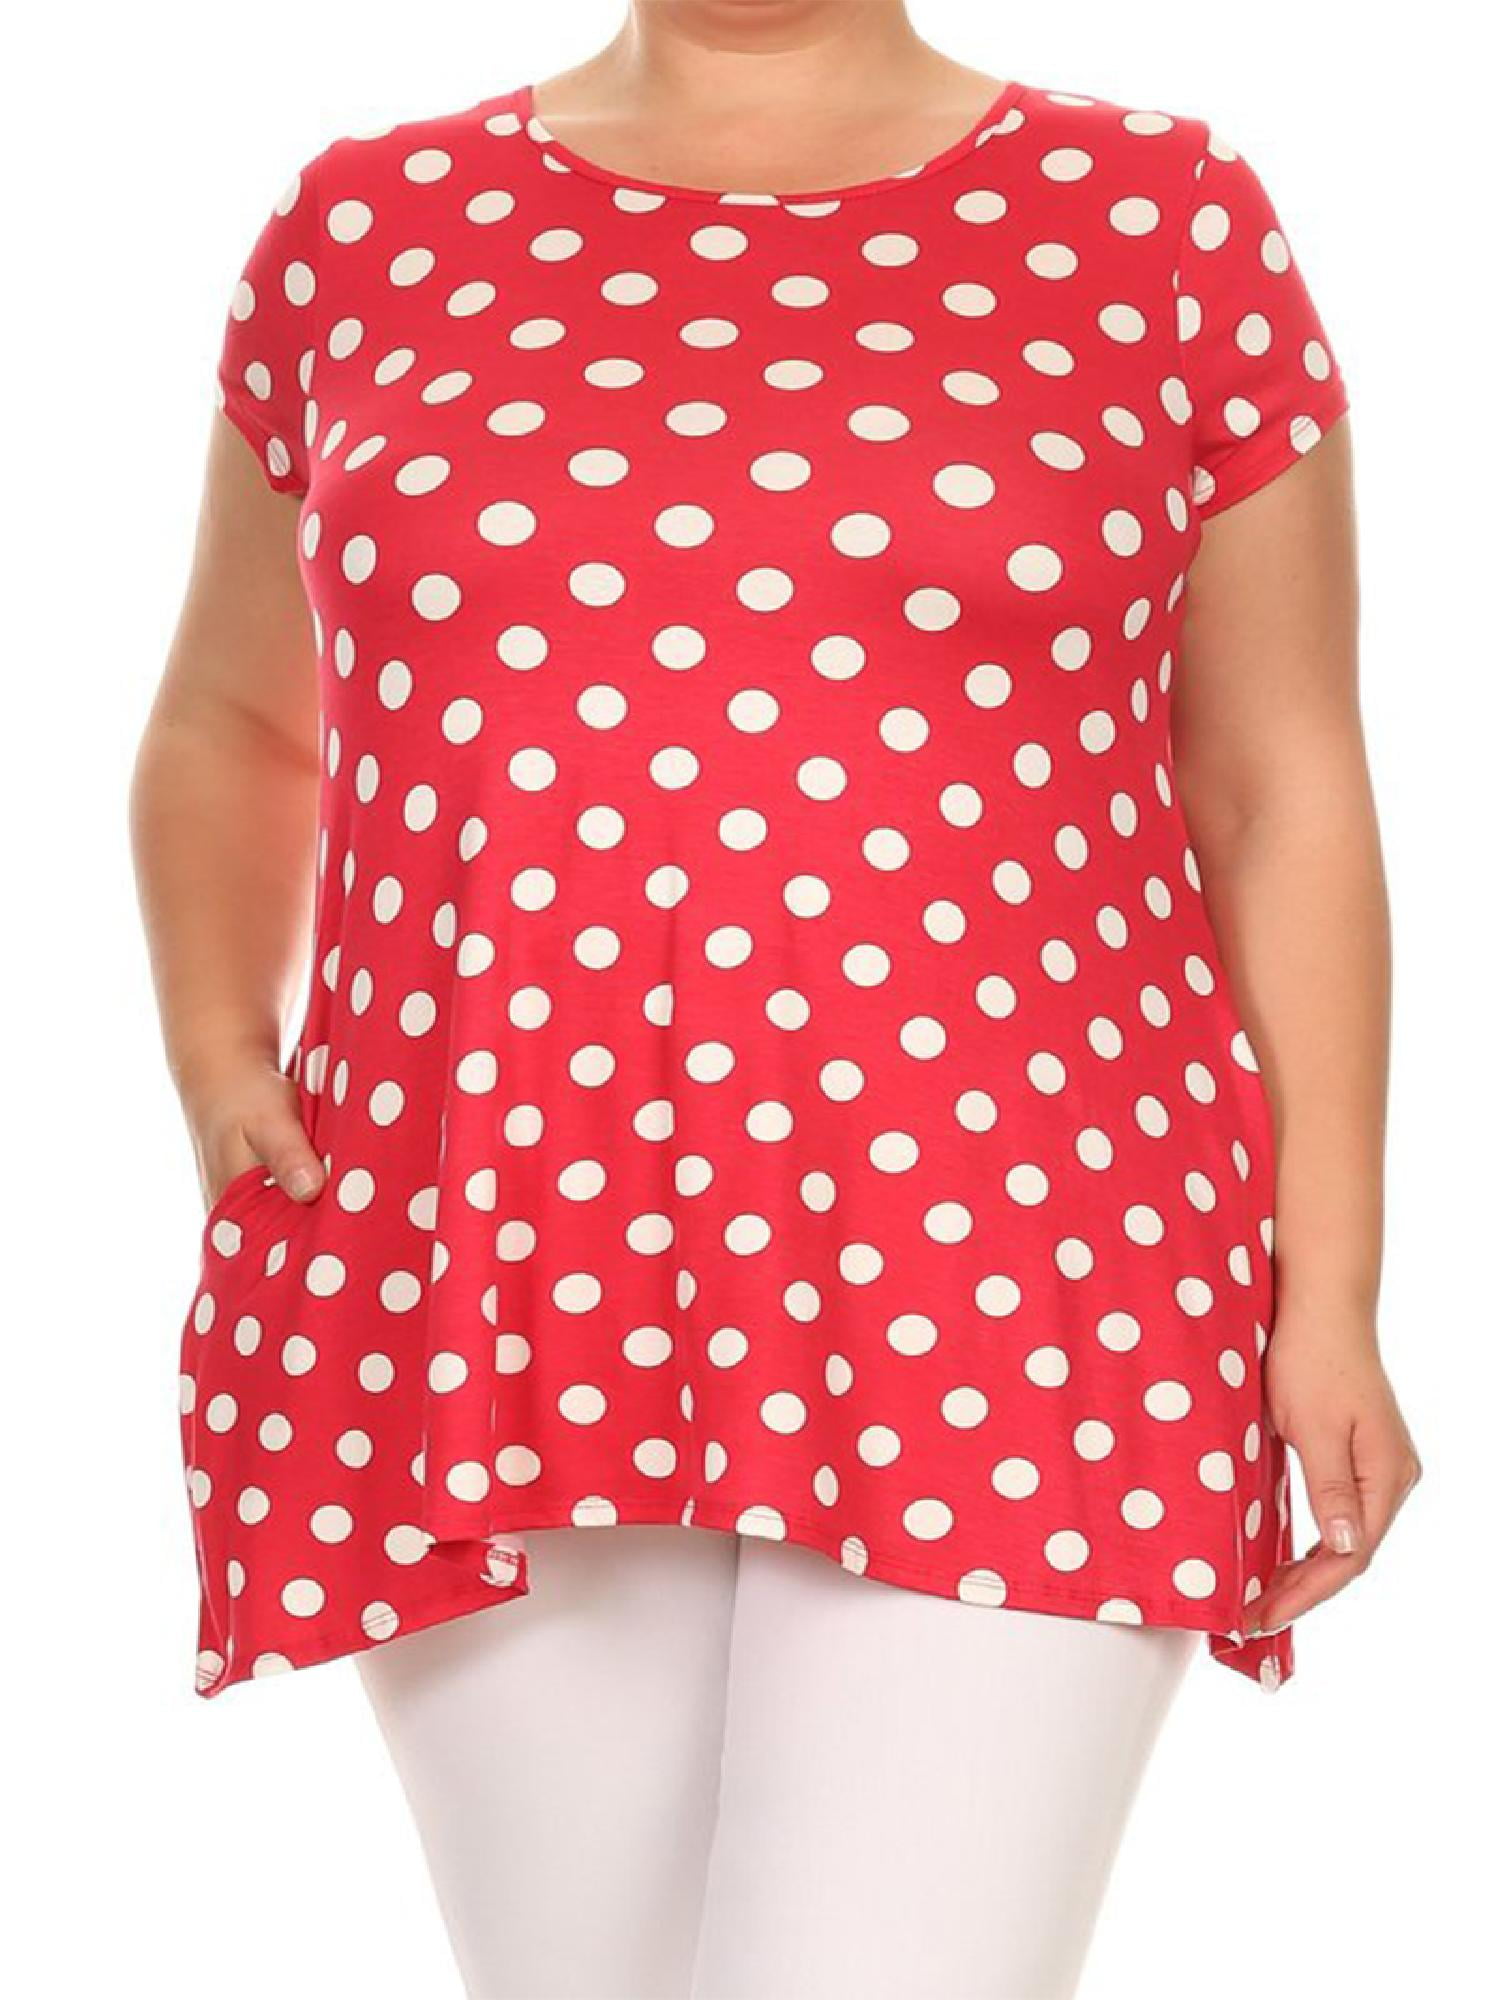 Moa Collection - Women's Plus Size Side Pockets Polka Dot Short Sleeves ...